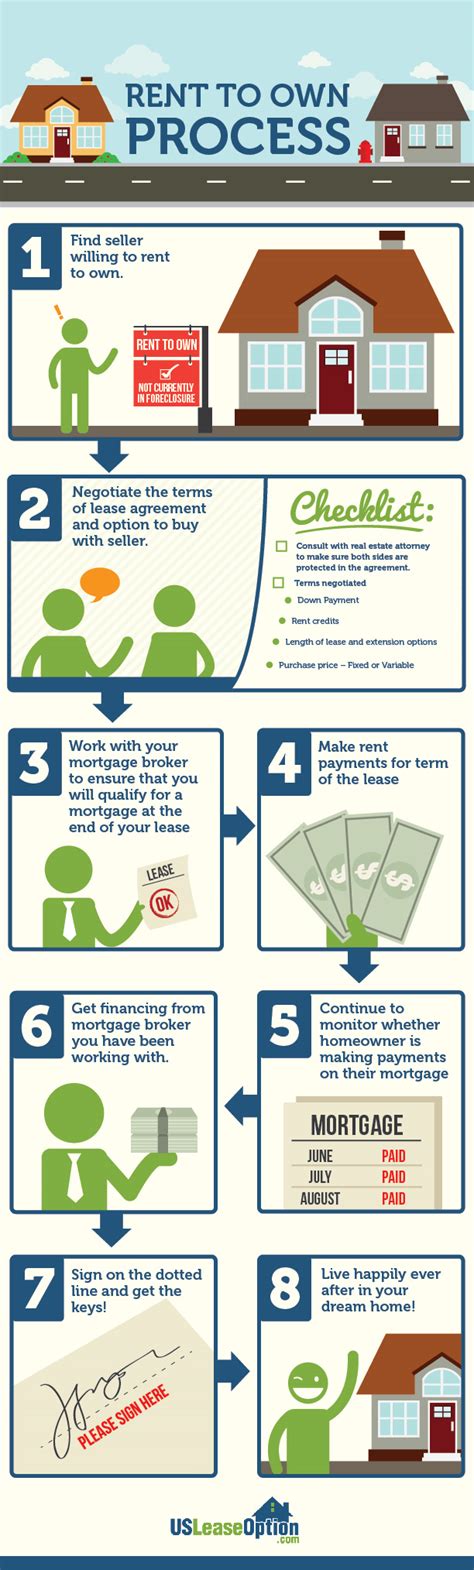 This Infographic Covers The Rent To Own Process For Procuring Real